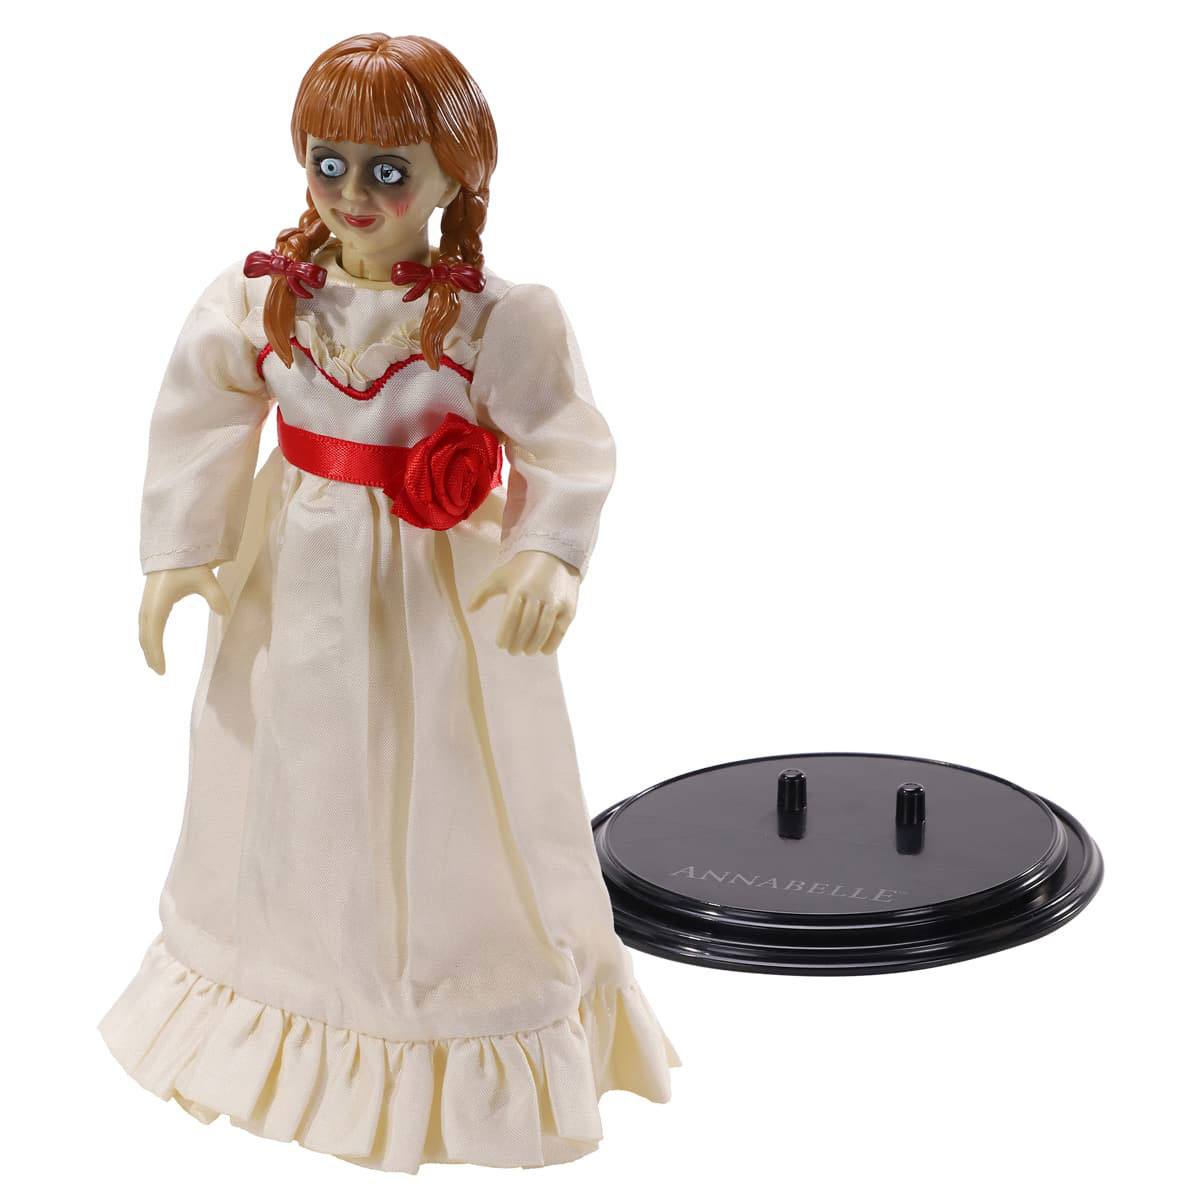 Conjuring - Annabelle - Toyllectibles bendyfigs